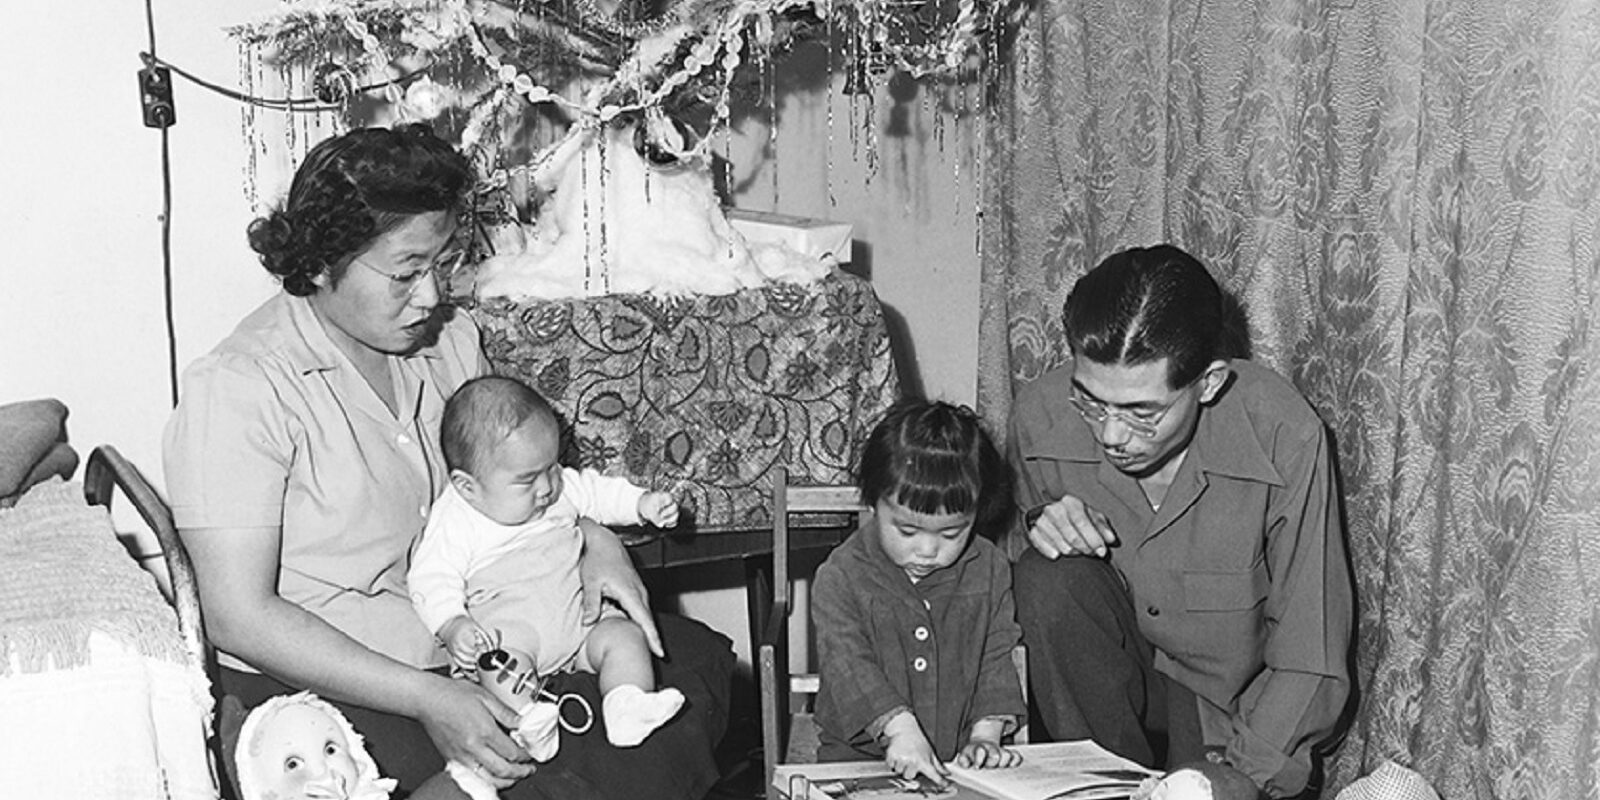 Christmas with the Frank Hirosawa Family in their barrack